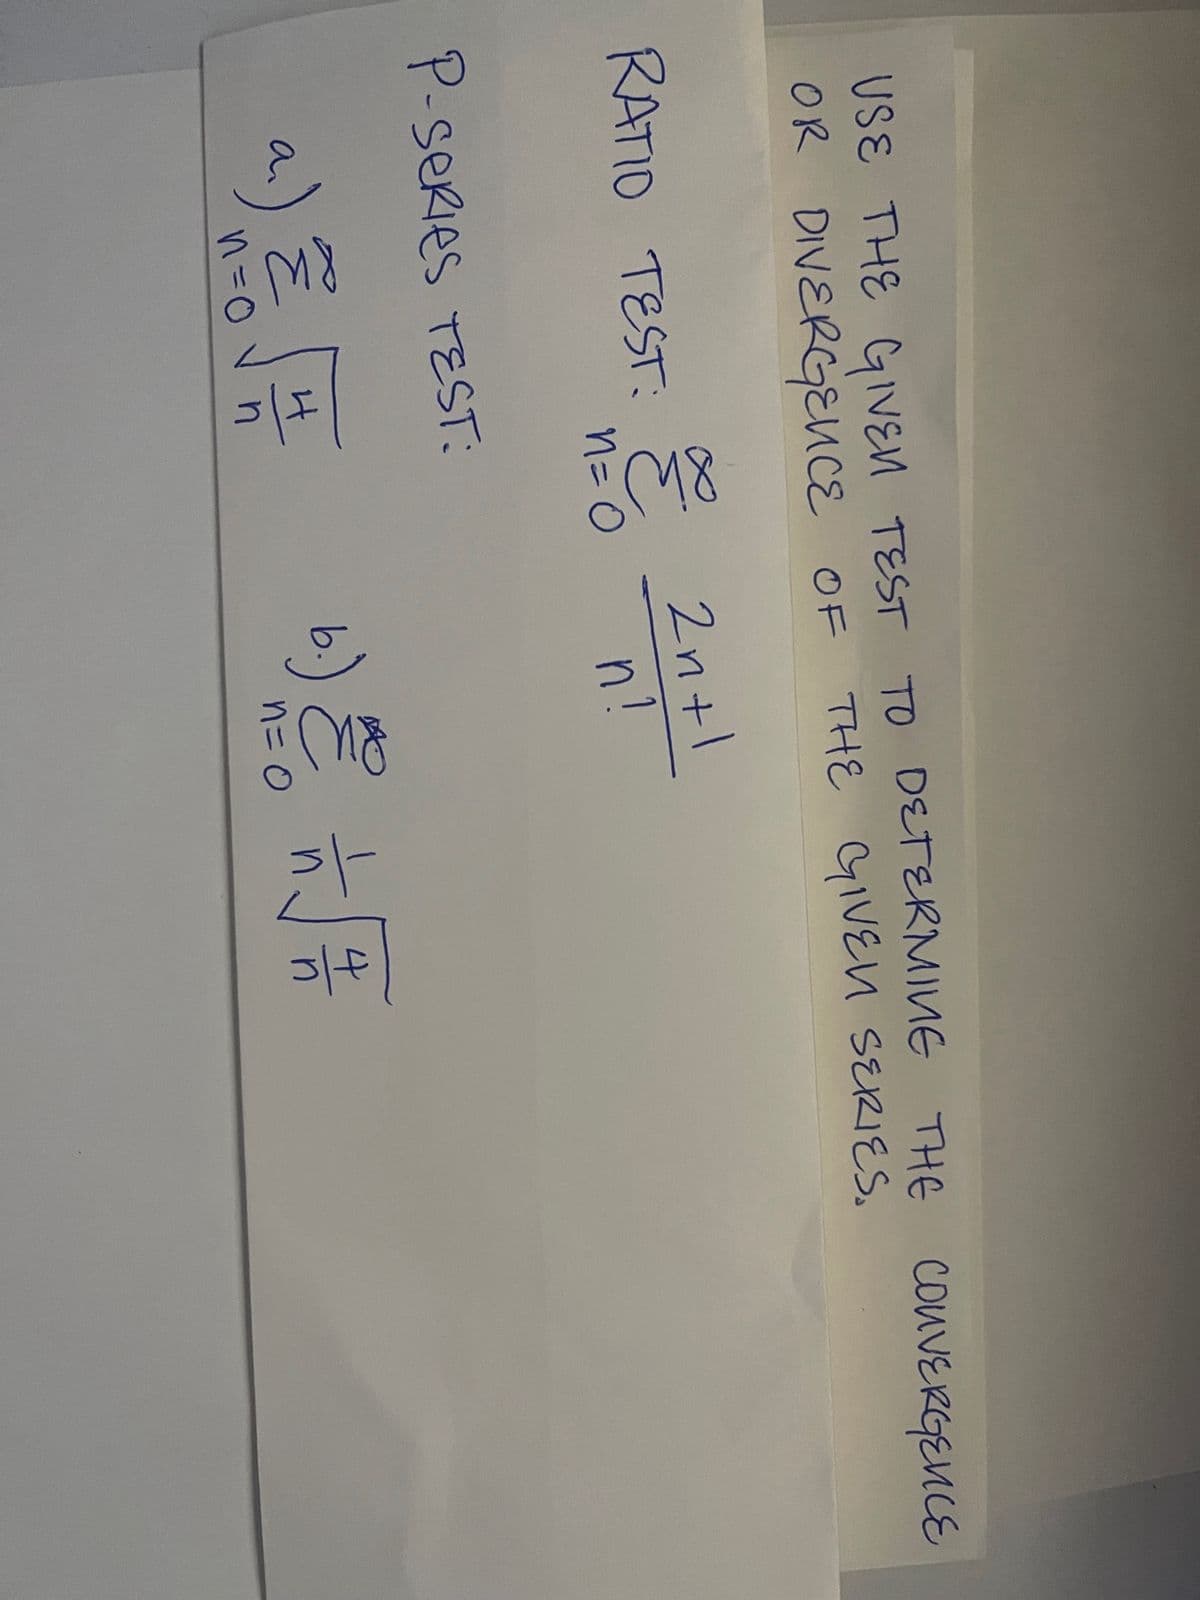 USE THE GIVEN TEST TO DETERMINE THE CONVERGENCE
THE GIVEN SERIES.
OR DIVERGENCE OF
RATIO TEST: Z 2n+1.
n=O
n!
P-SERIES TEST:
a) Z
n=0 vn
b.) & + √√2/1/2
n = 0